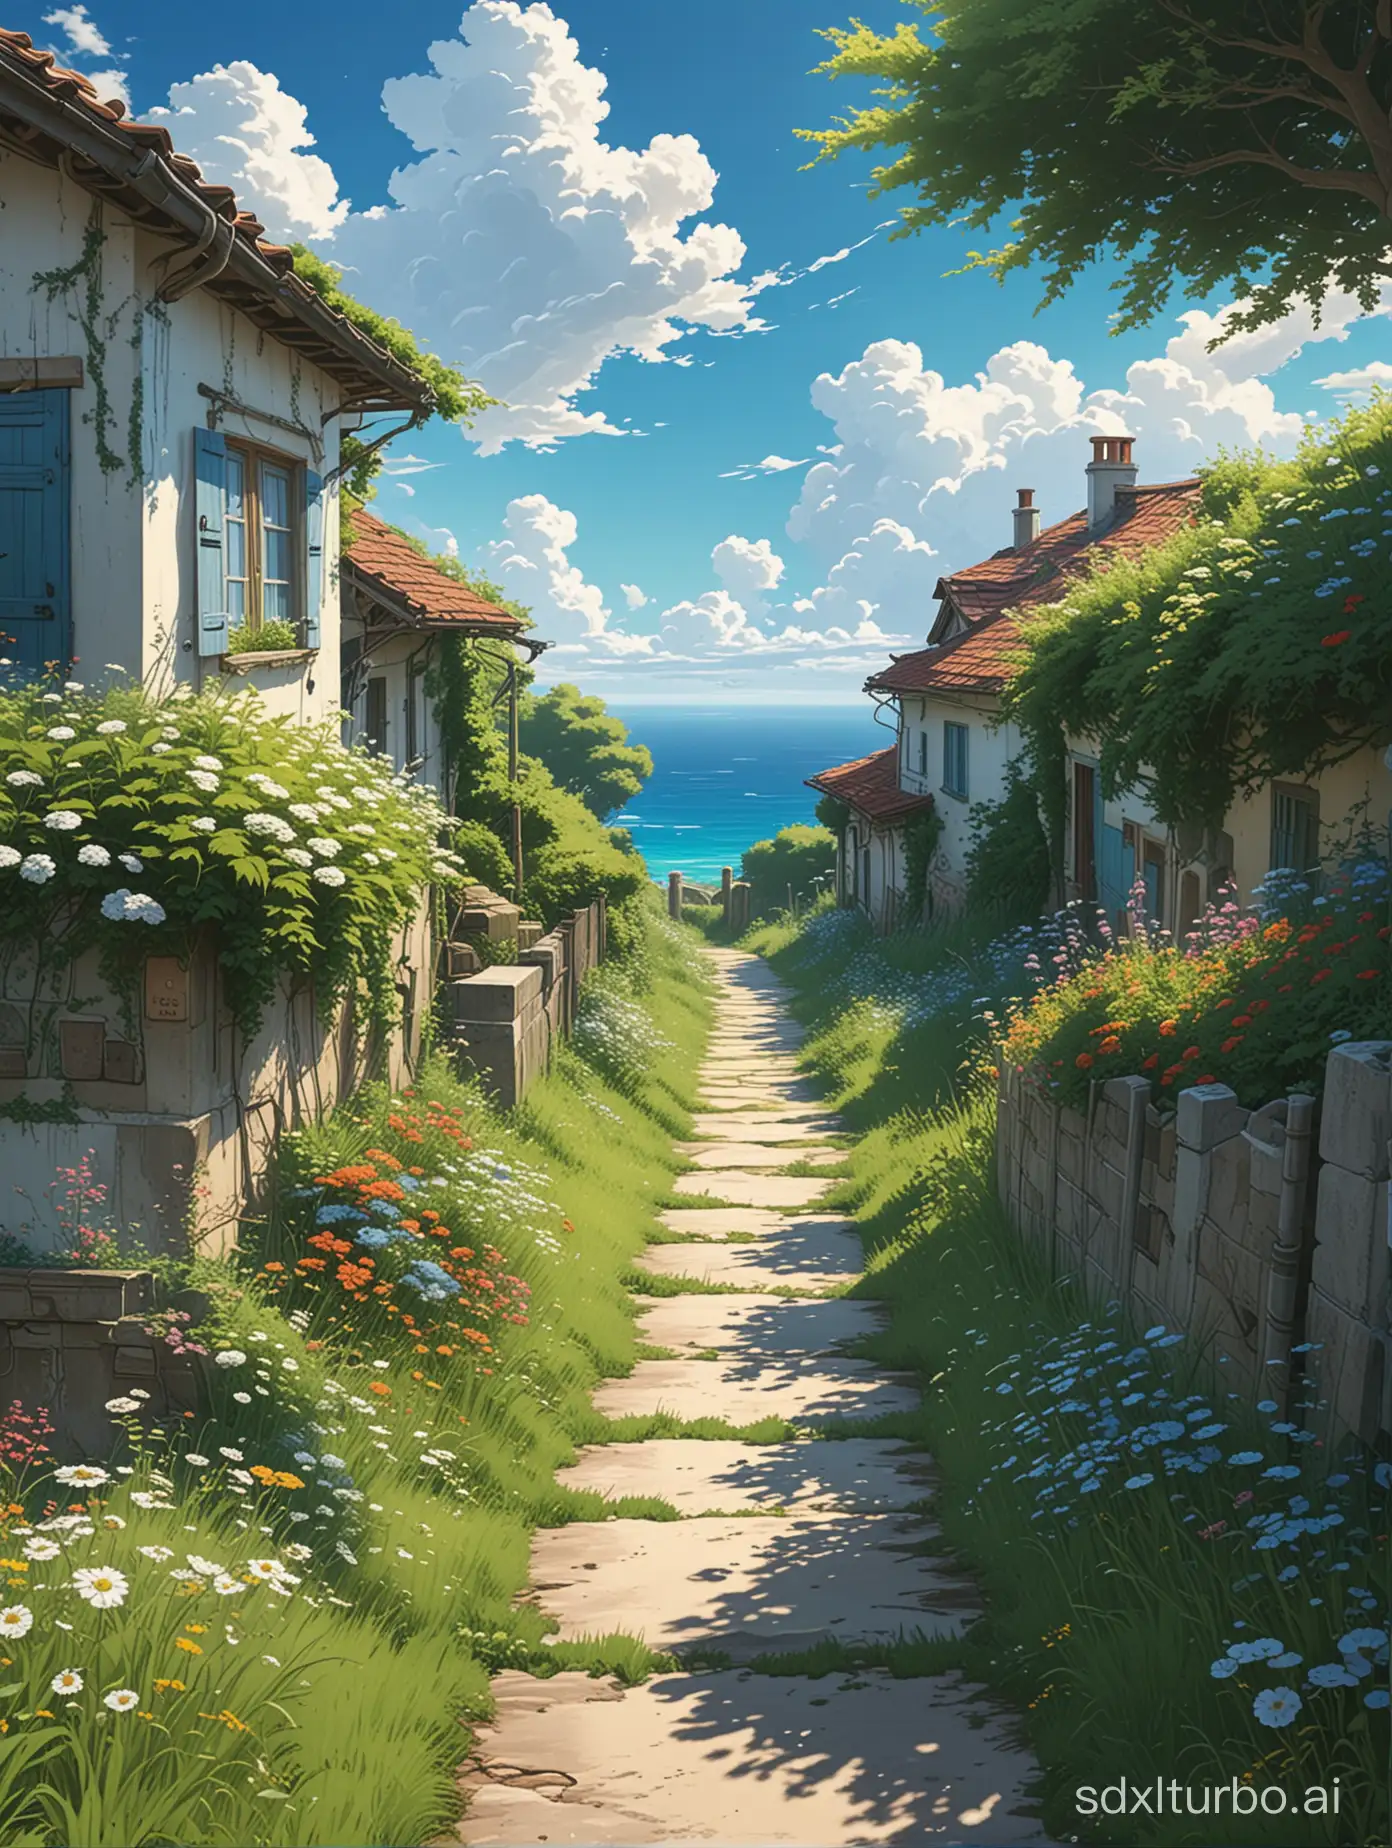 A Ghibli anime anime style, a pathway and side by side is abandoned houses full of grass and flowers,ocean overlooking,detailed shadow of Trees,blue sky,fluffy white clouds,glossy look,cinematic